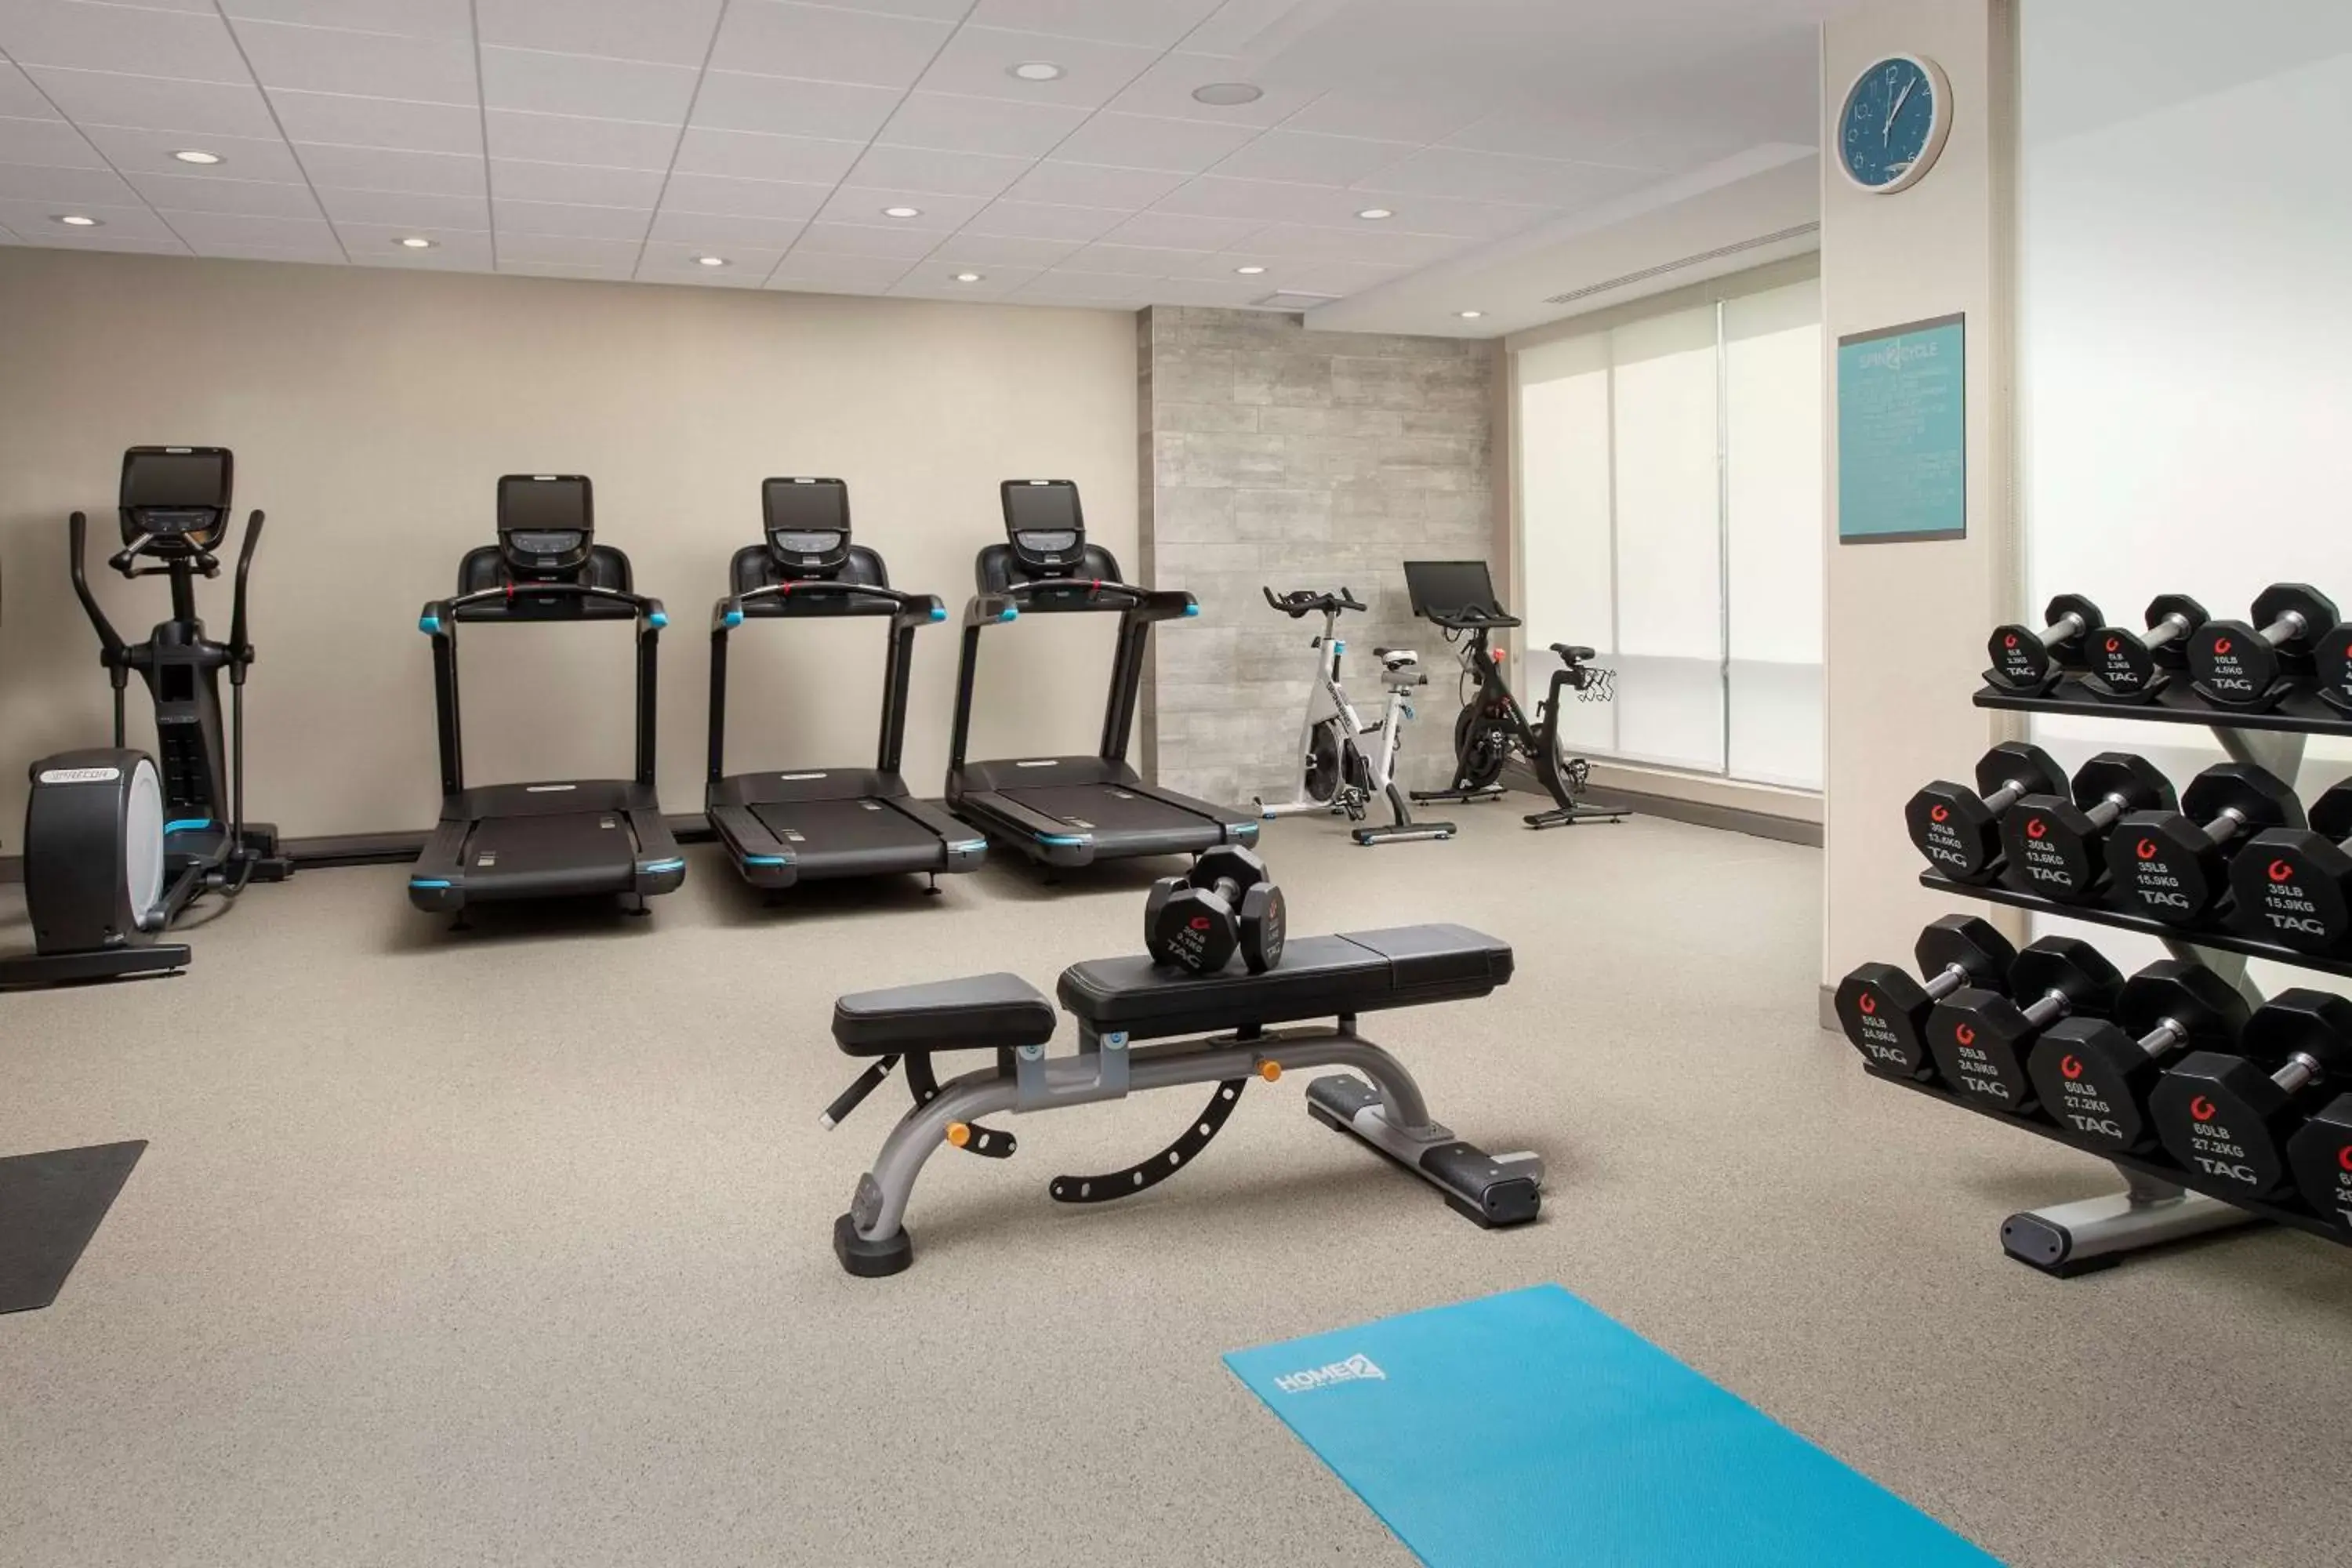 Fitness centre/facilities, Fitness Center/Facilities in Home2 Suites By Hilton Owings Mills, Md